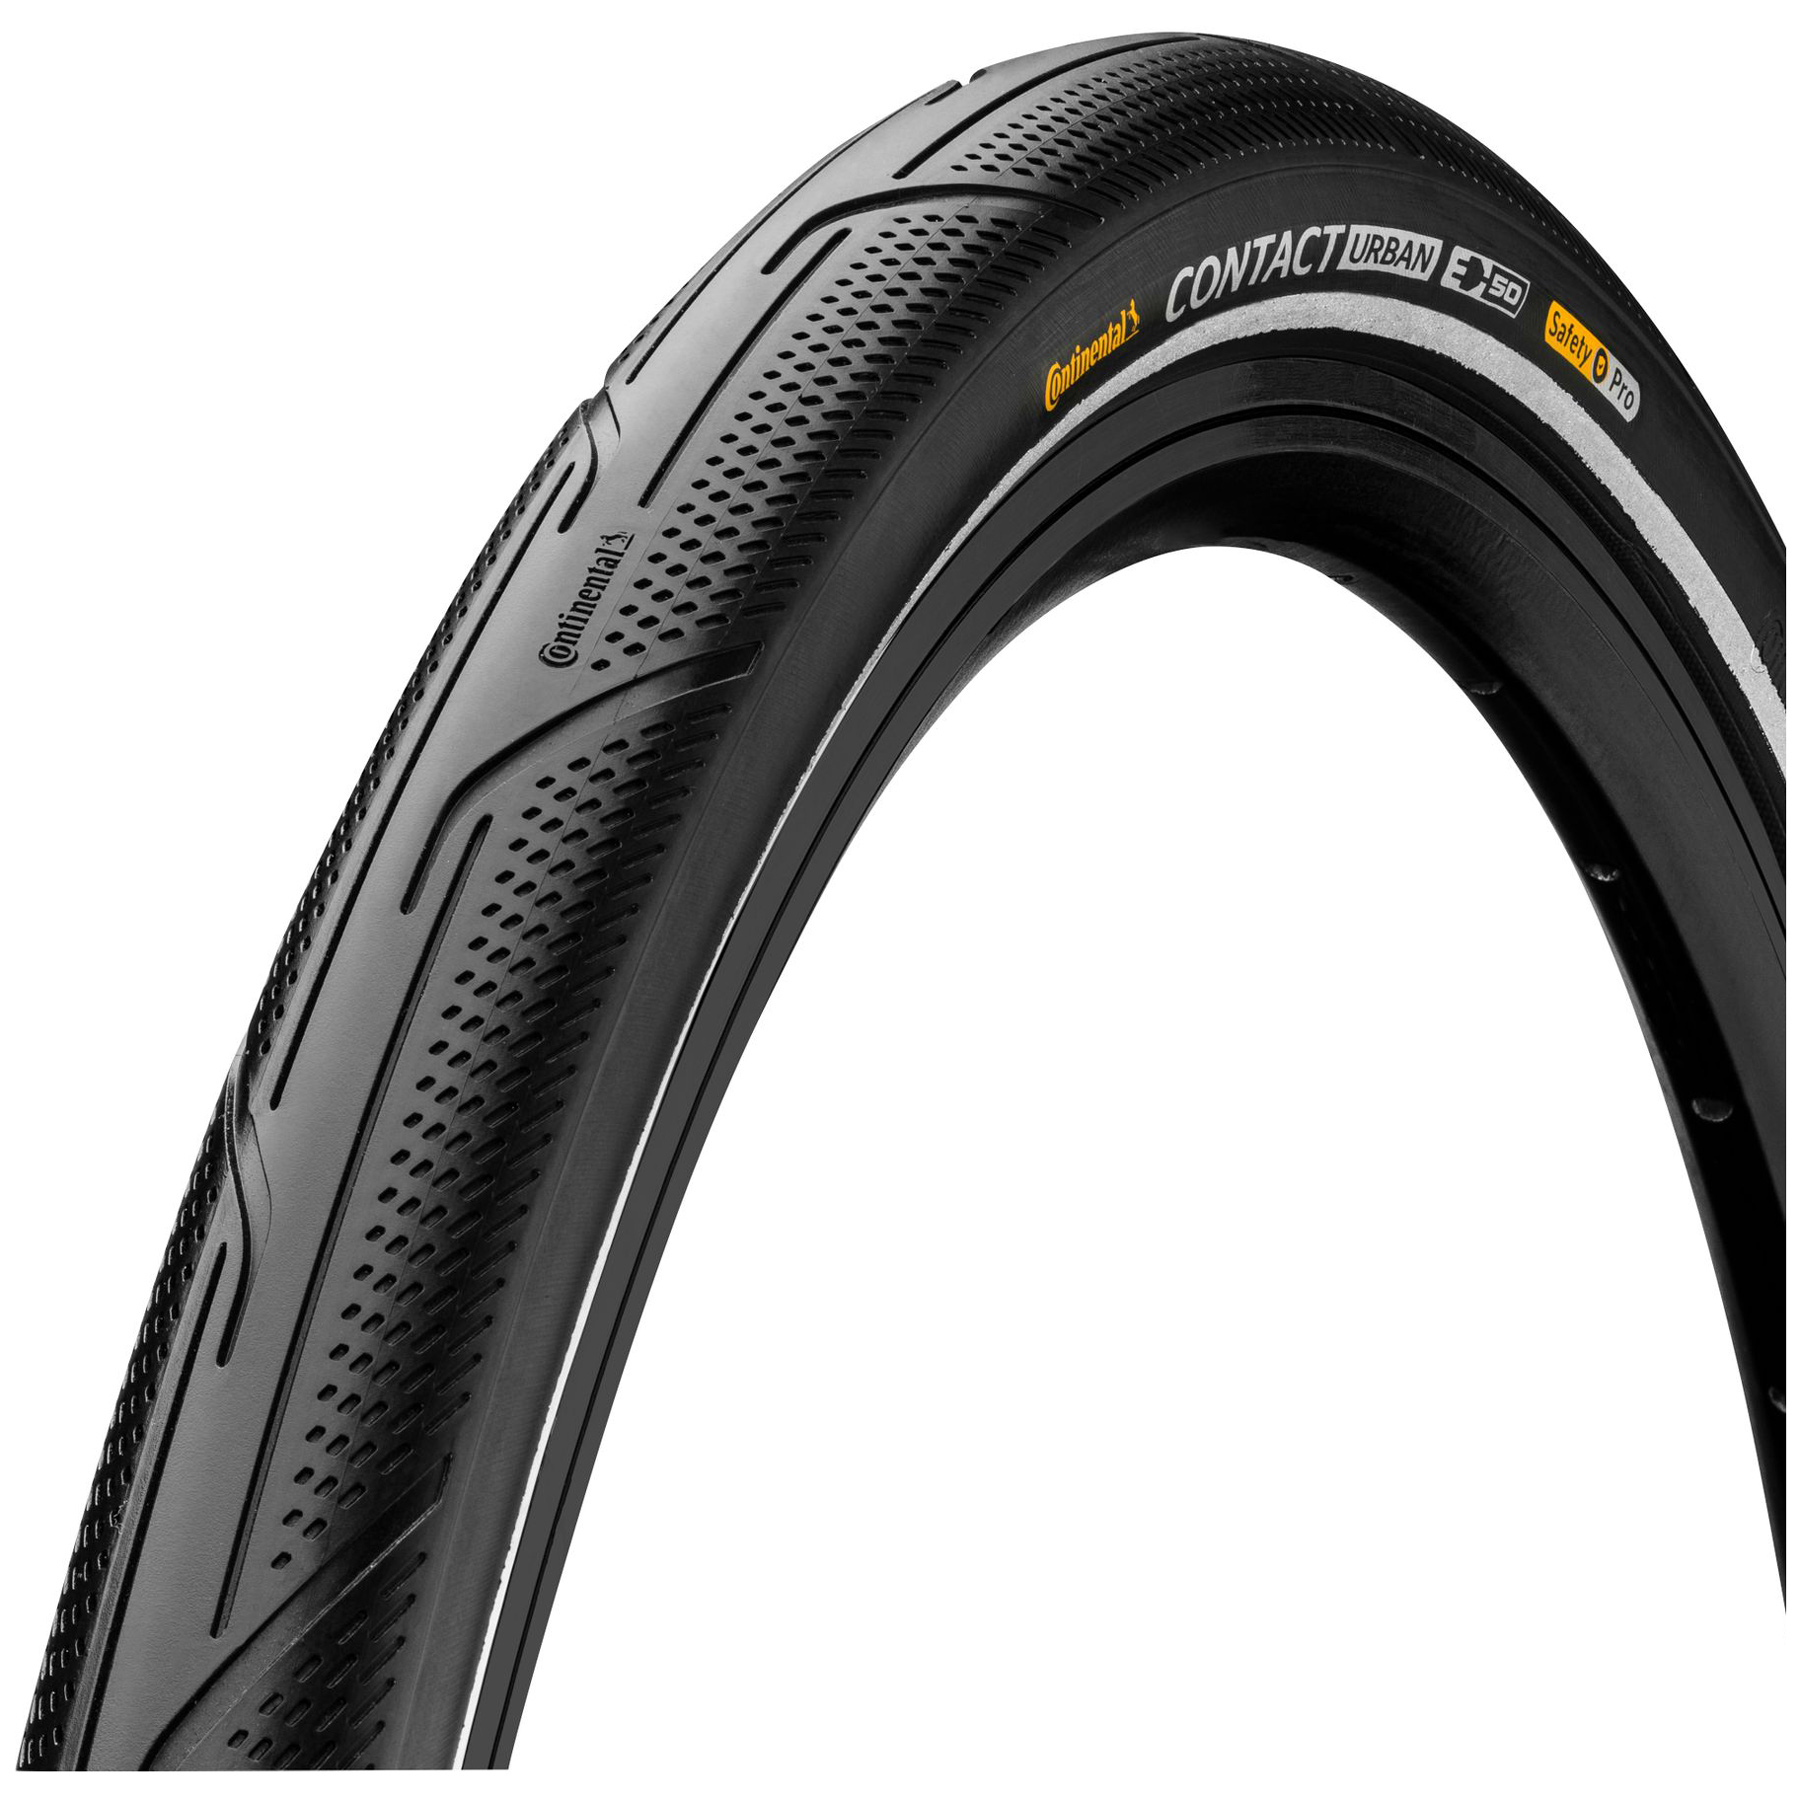 Picture of Continental Contact Urban Wire Bead Tire - PureGrip | black reflective - ECE-R75 - 42-406